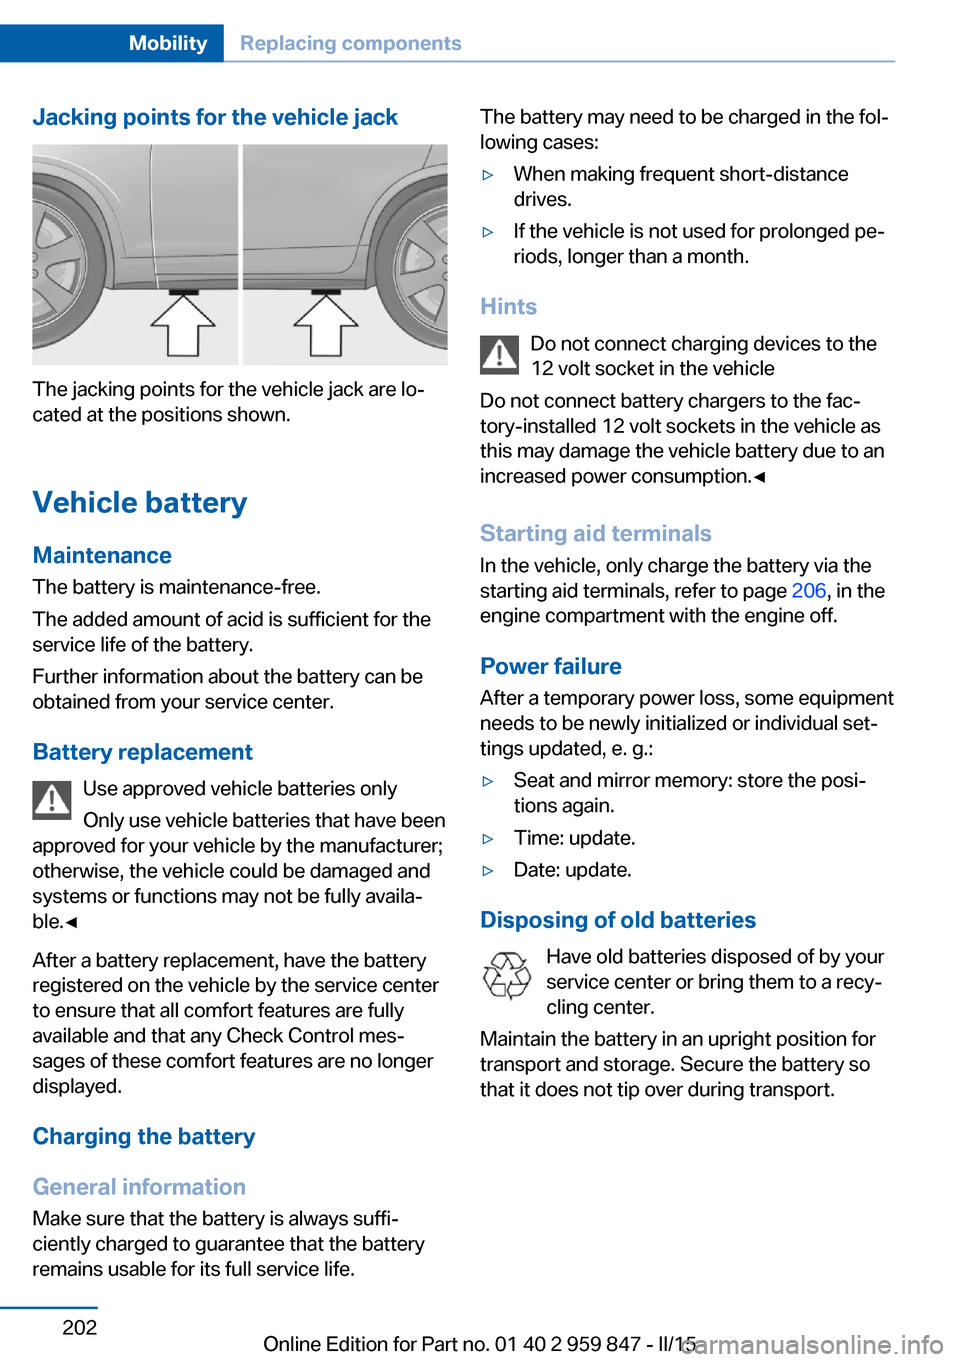 BMW 2 SERIES CONVERTIBLE 2015 F23 Owners Manual Jacking points for the vehicle jack
The jacking points for the vehicle jack are lo‐
cated at the positions shown.
Vehicle battery Maintenance
The battery is maintenance-free.
The added amount of aci